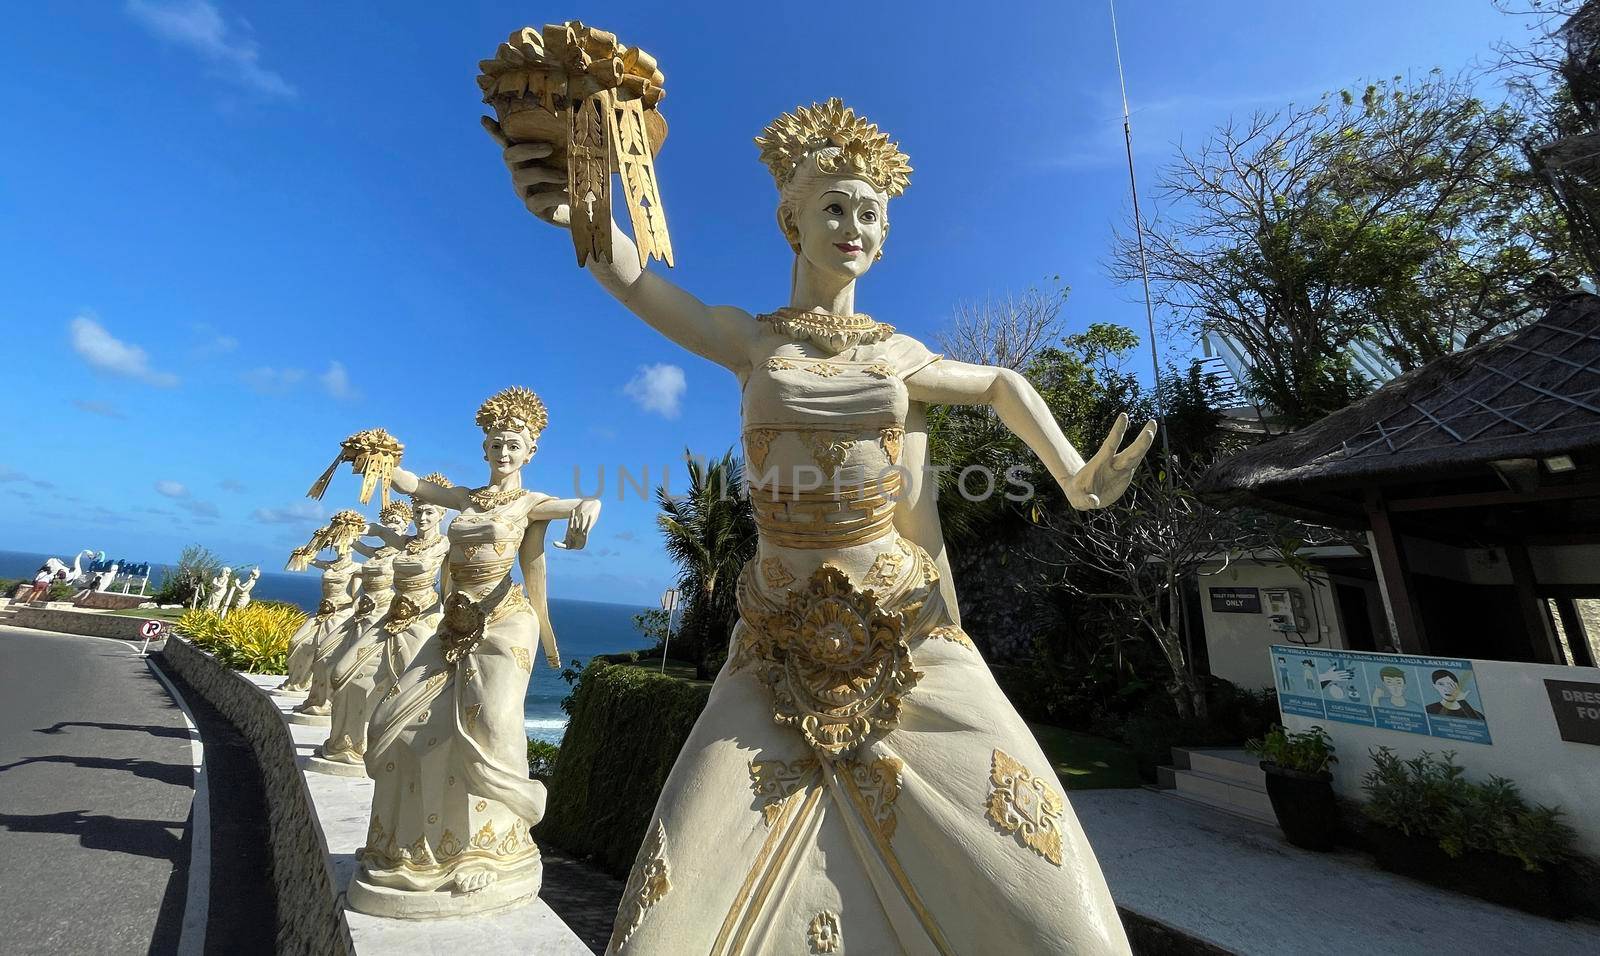 Bali, Indonesia - 06 July 2022: Sculpture of Balinese dancers at the entrance to Pantai Melasti Beach under the blue sky